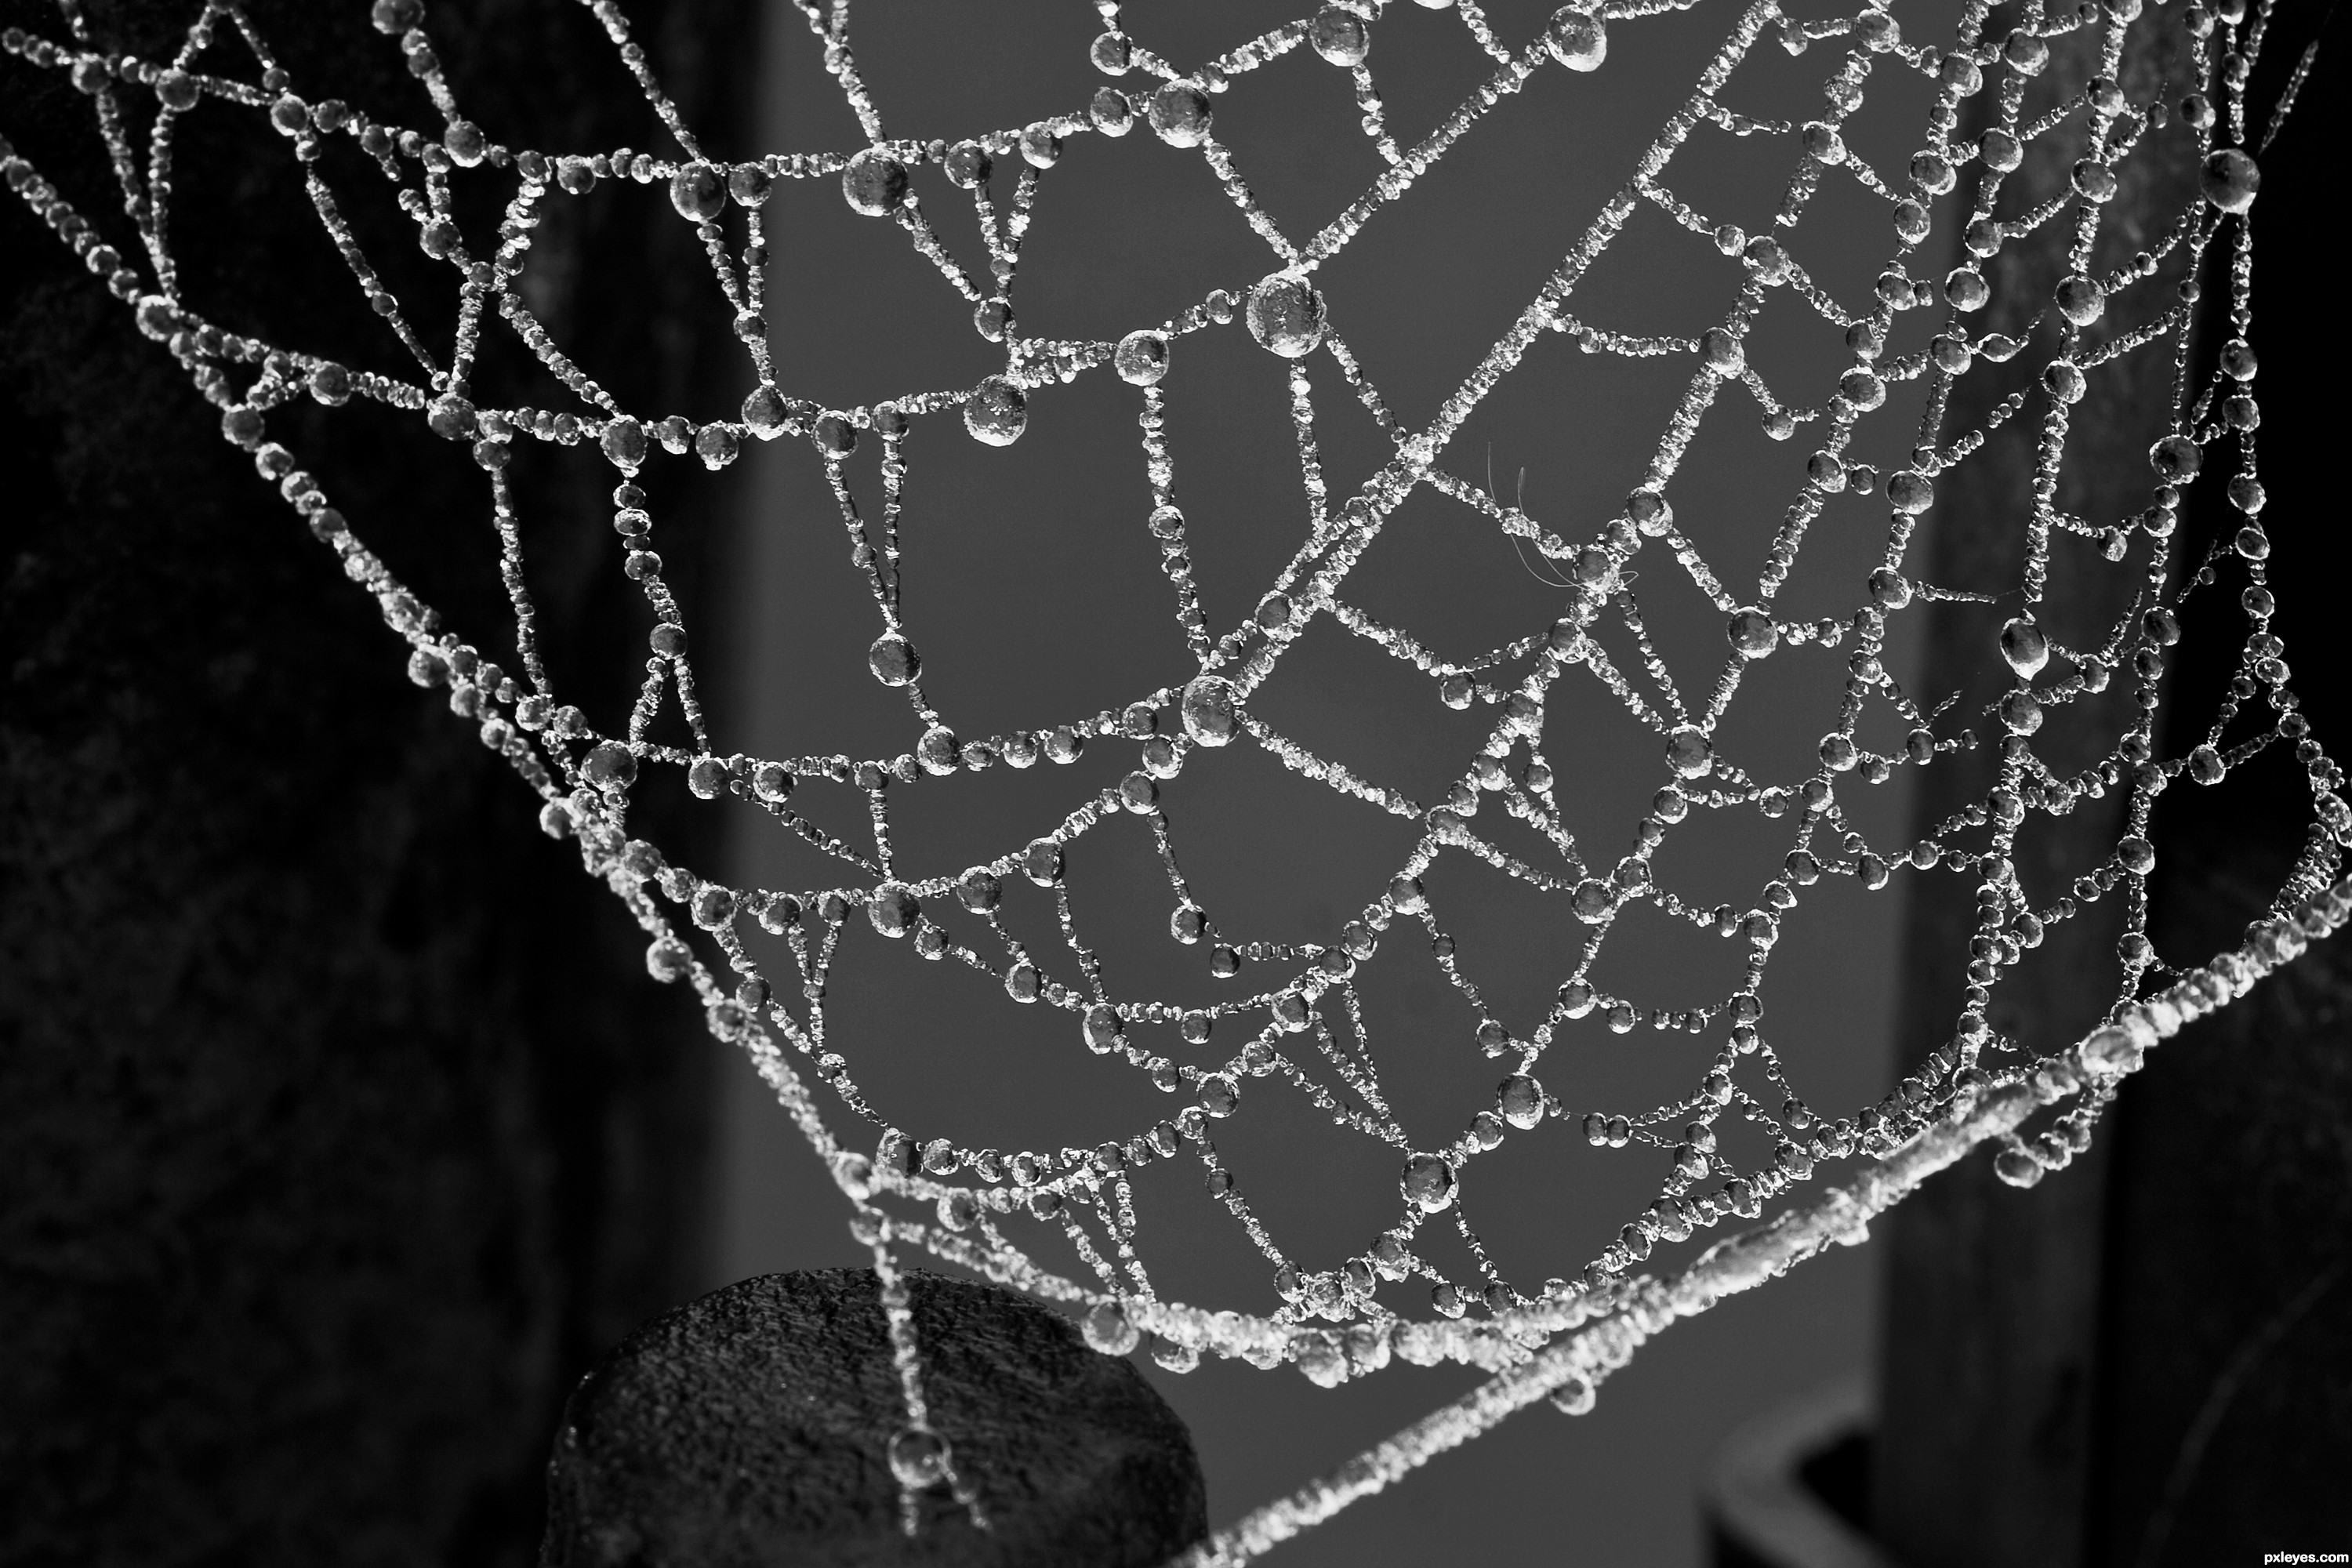 Cobweb picture, by shanta4 for: dew 2 photography contest - Pxleyes.com